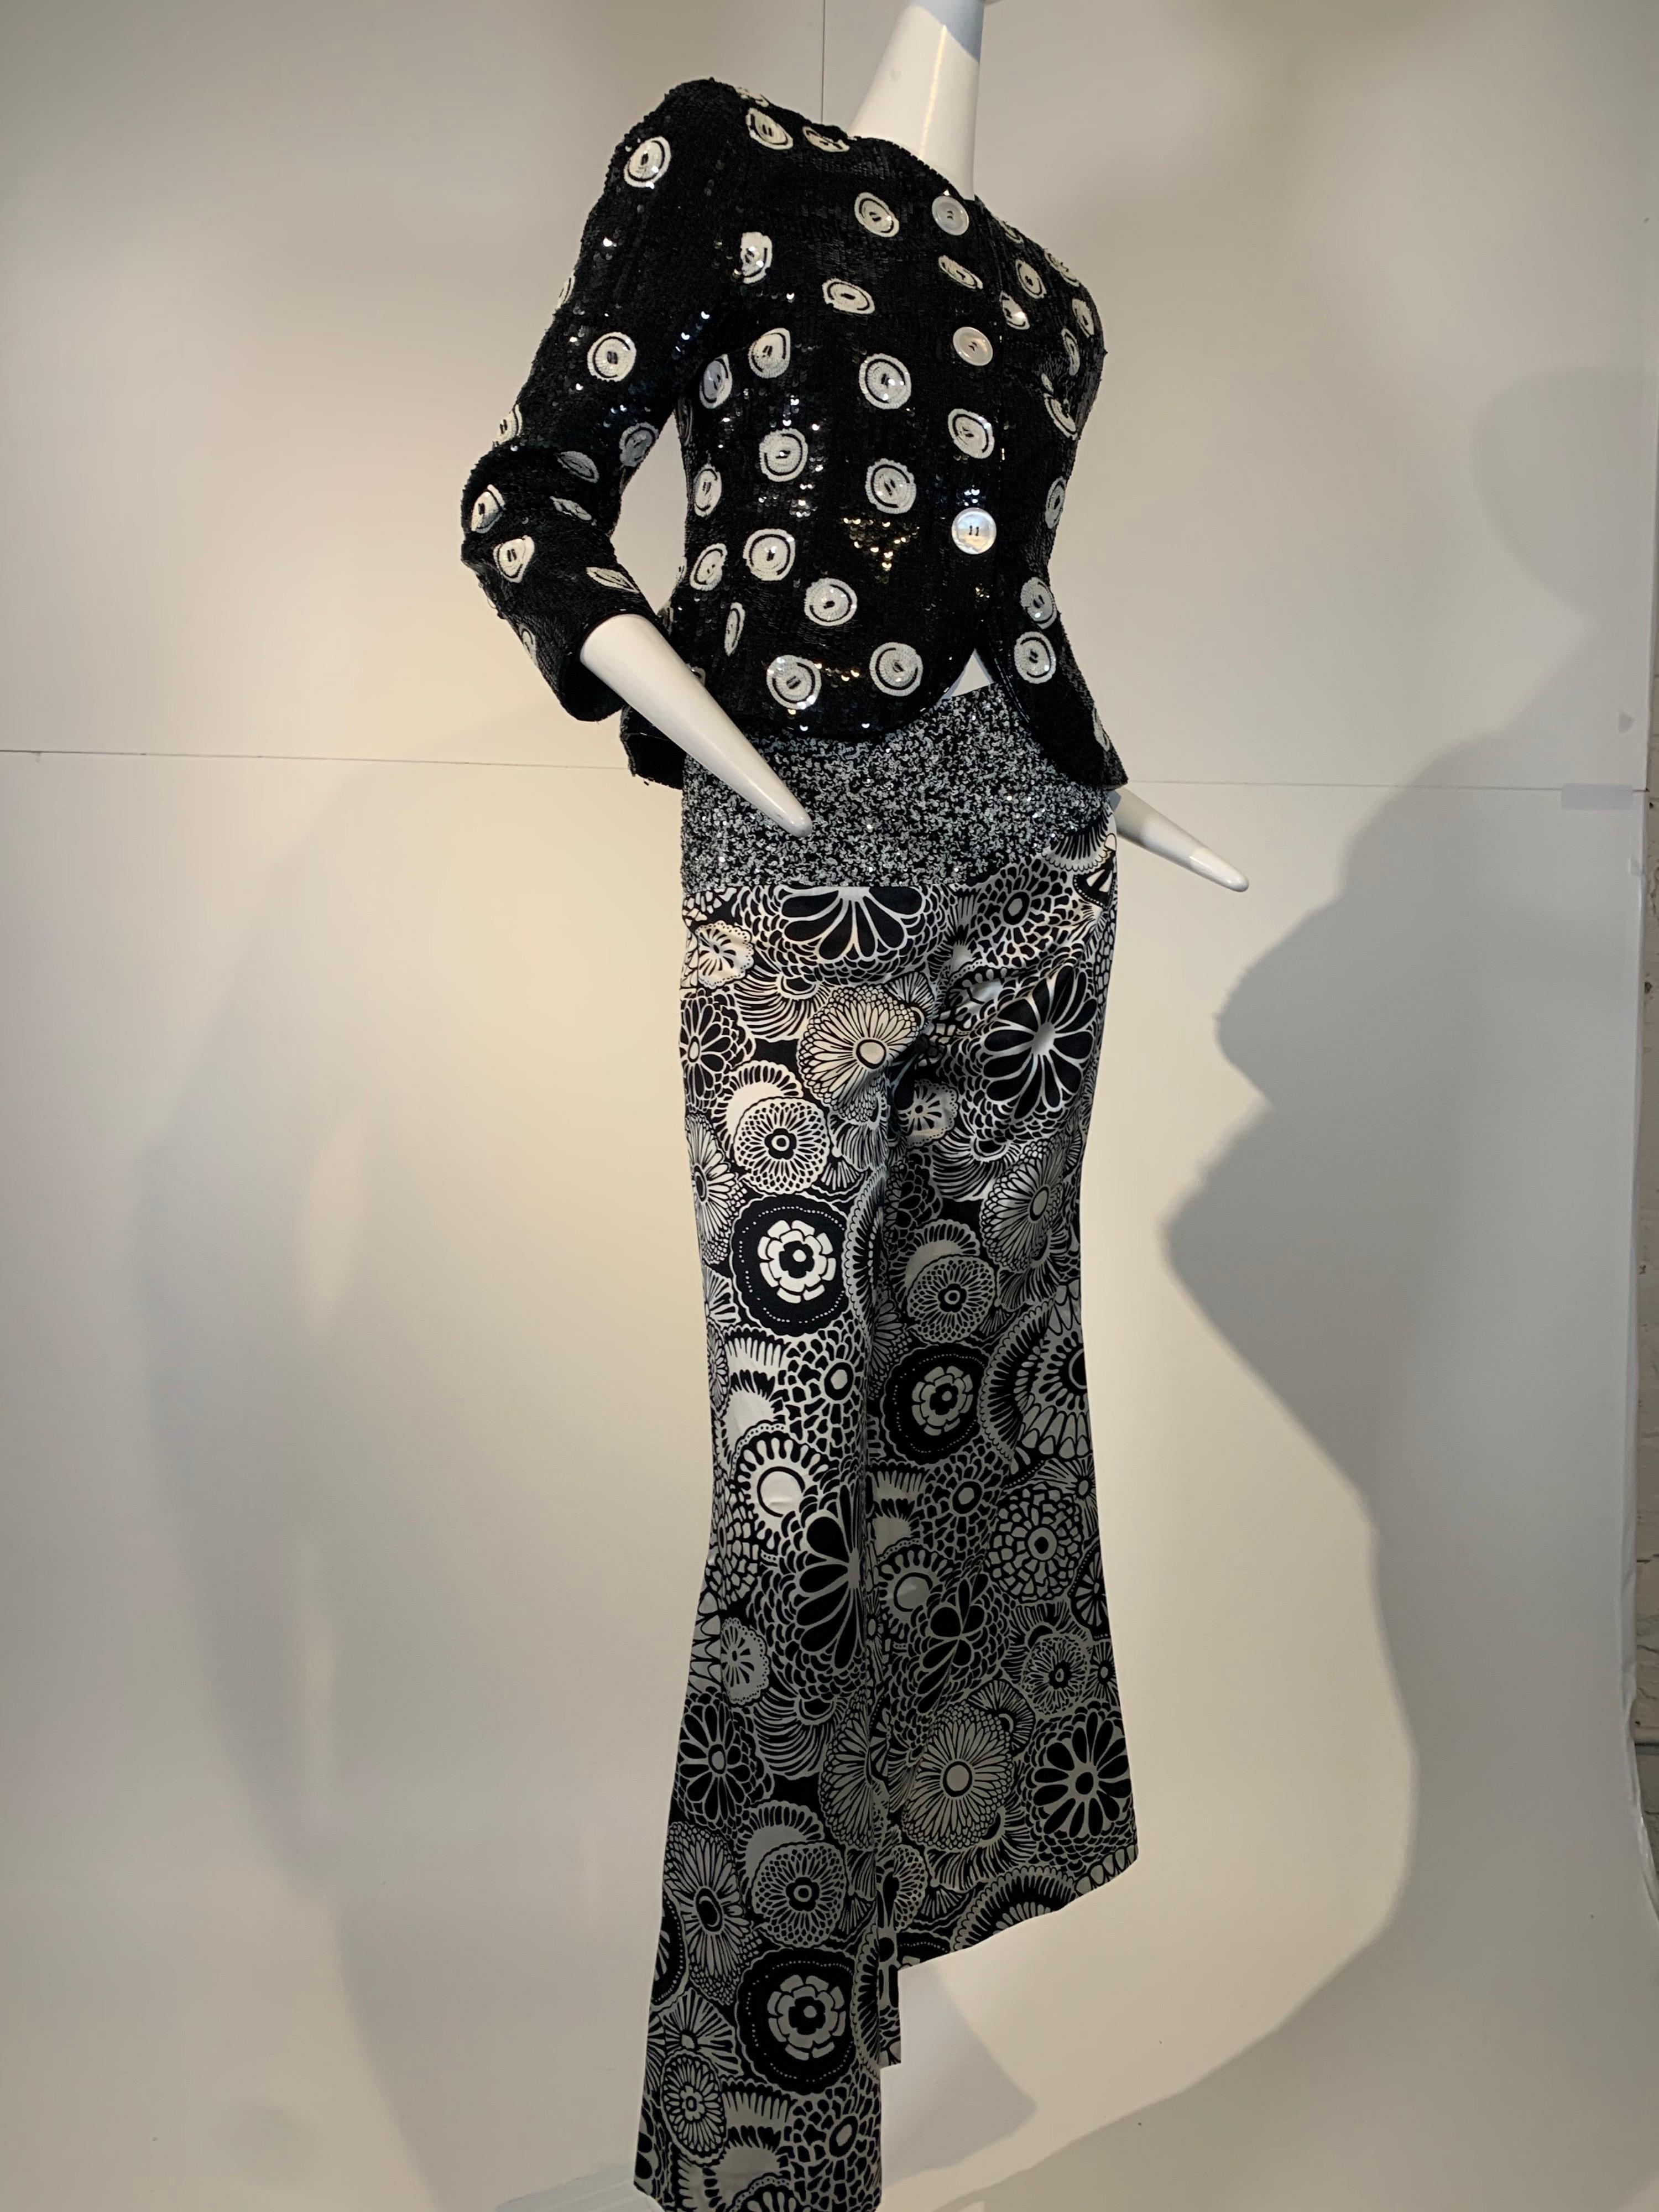 1980s Bill Blass black and white whimsical mixed-print pants and jacket ensemble originally purchased at Nan Duskin:  Jacket is a graphic button pattern completely covered in sequins and beads. Buttons up the front match the print of the jacket.